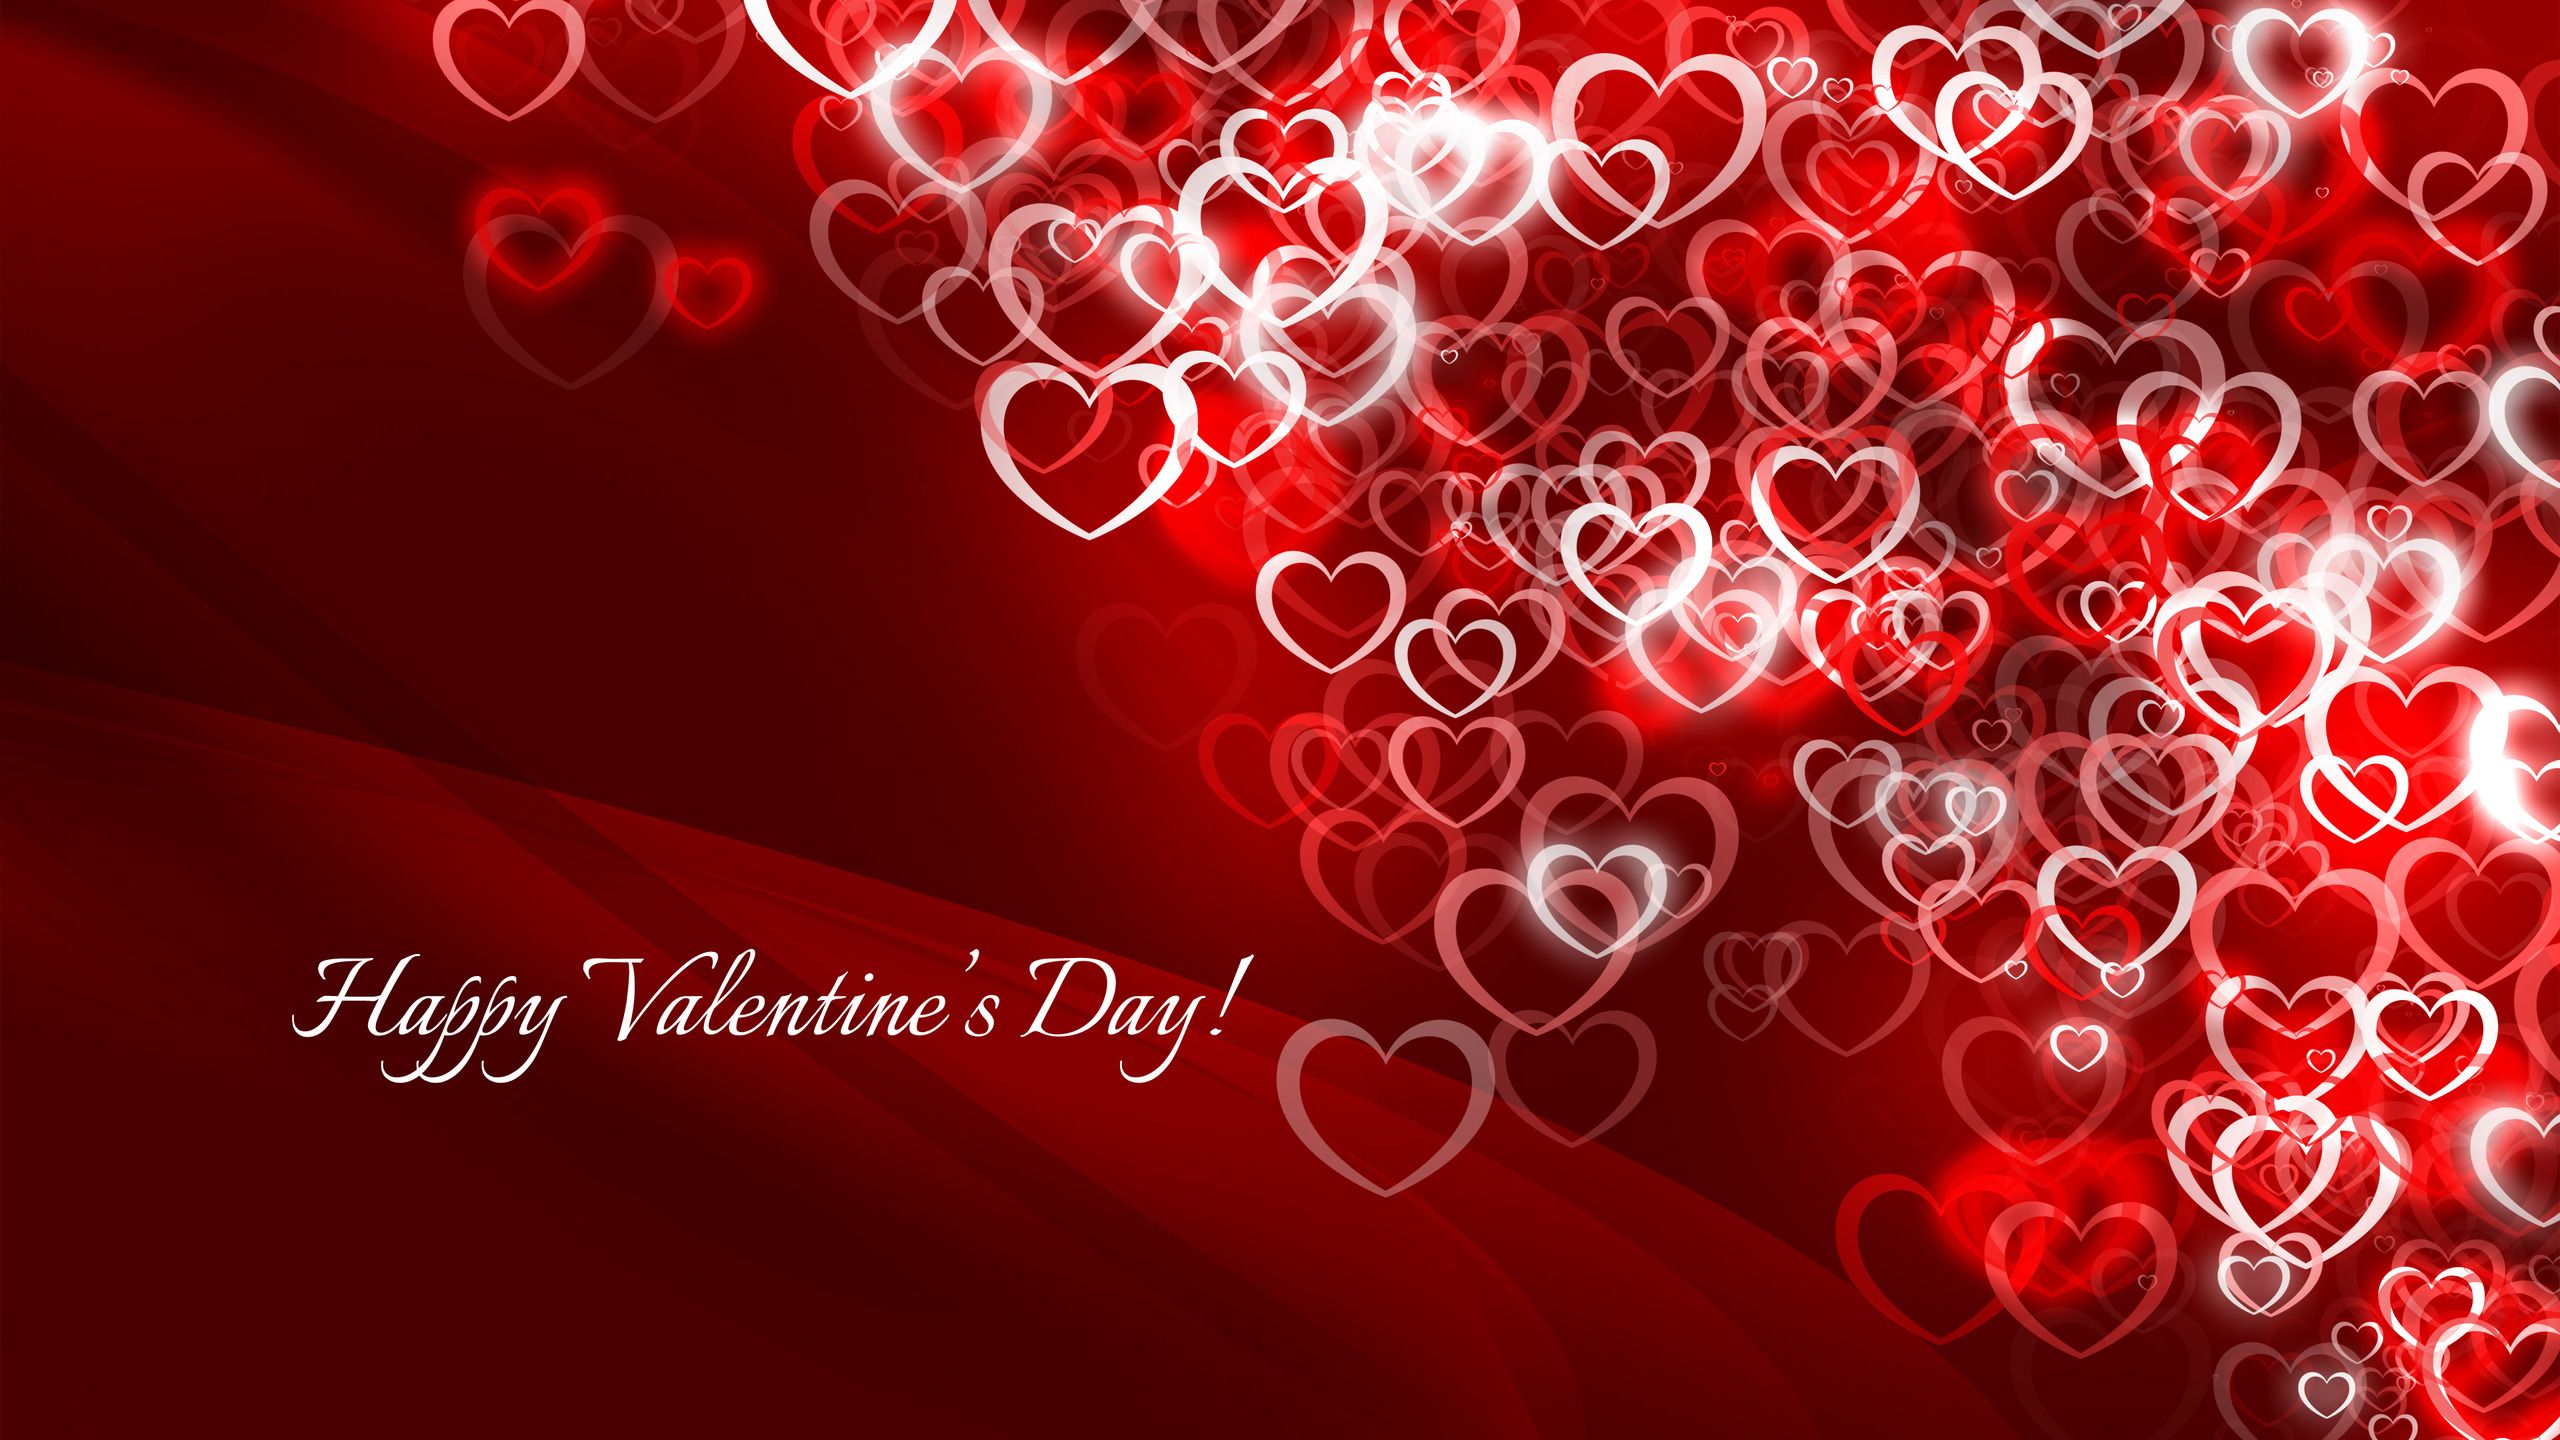 Happy-Valentines-Day-Wallpaper-Images.jpg